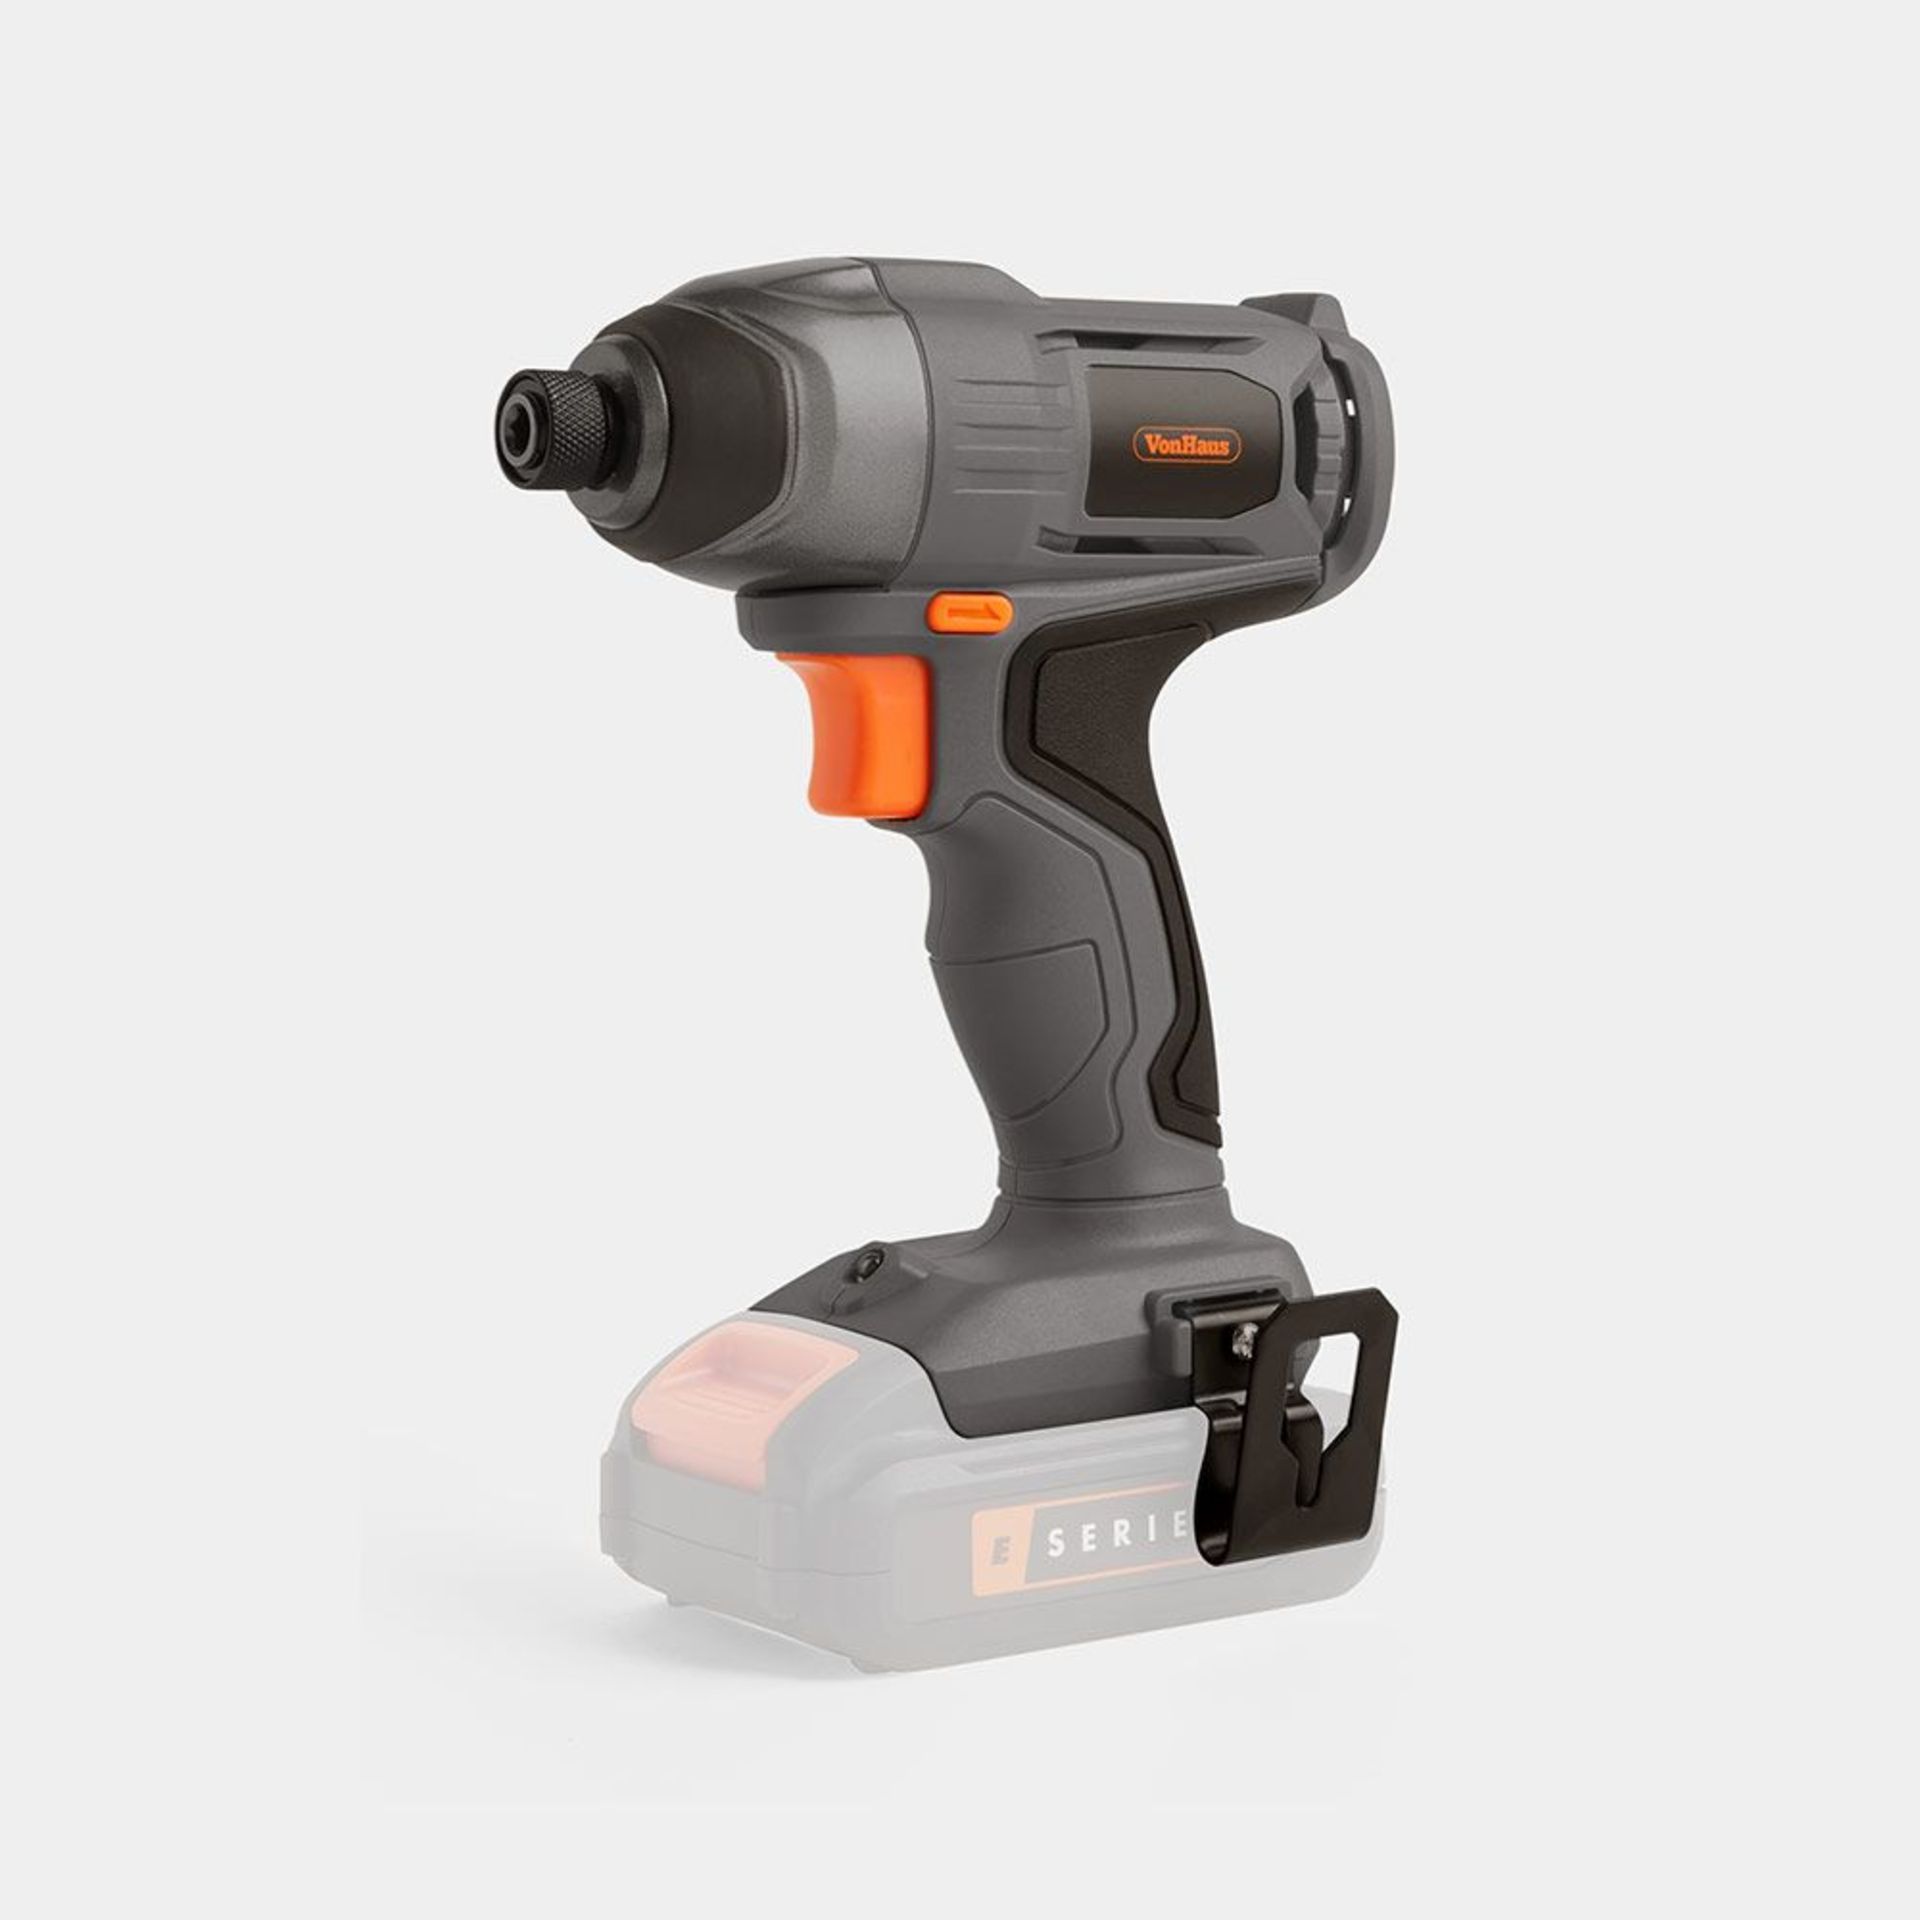 (22/122)E-Series 18V Cordless Impact Drill Driver. - PW. Compact, cordless and well-built, this